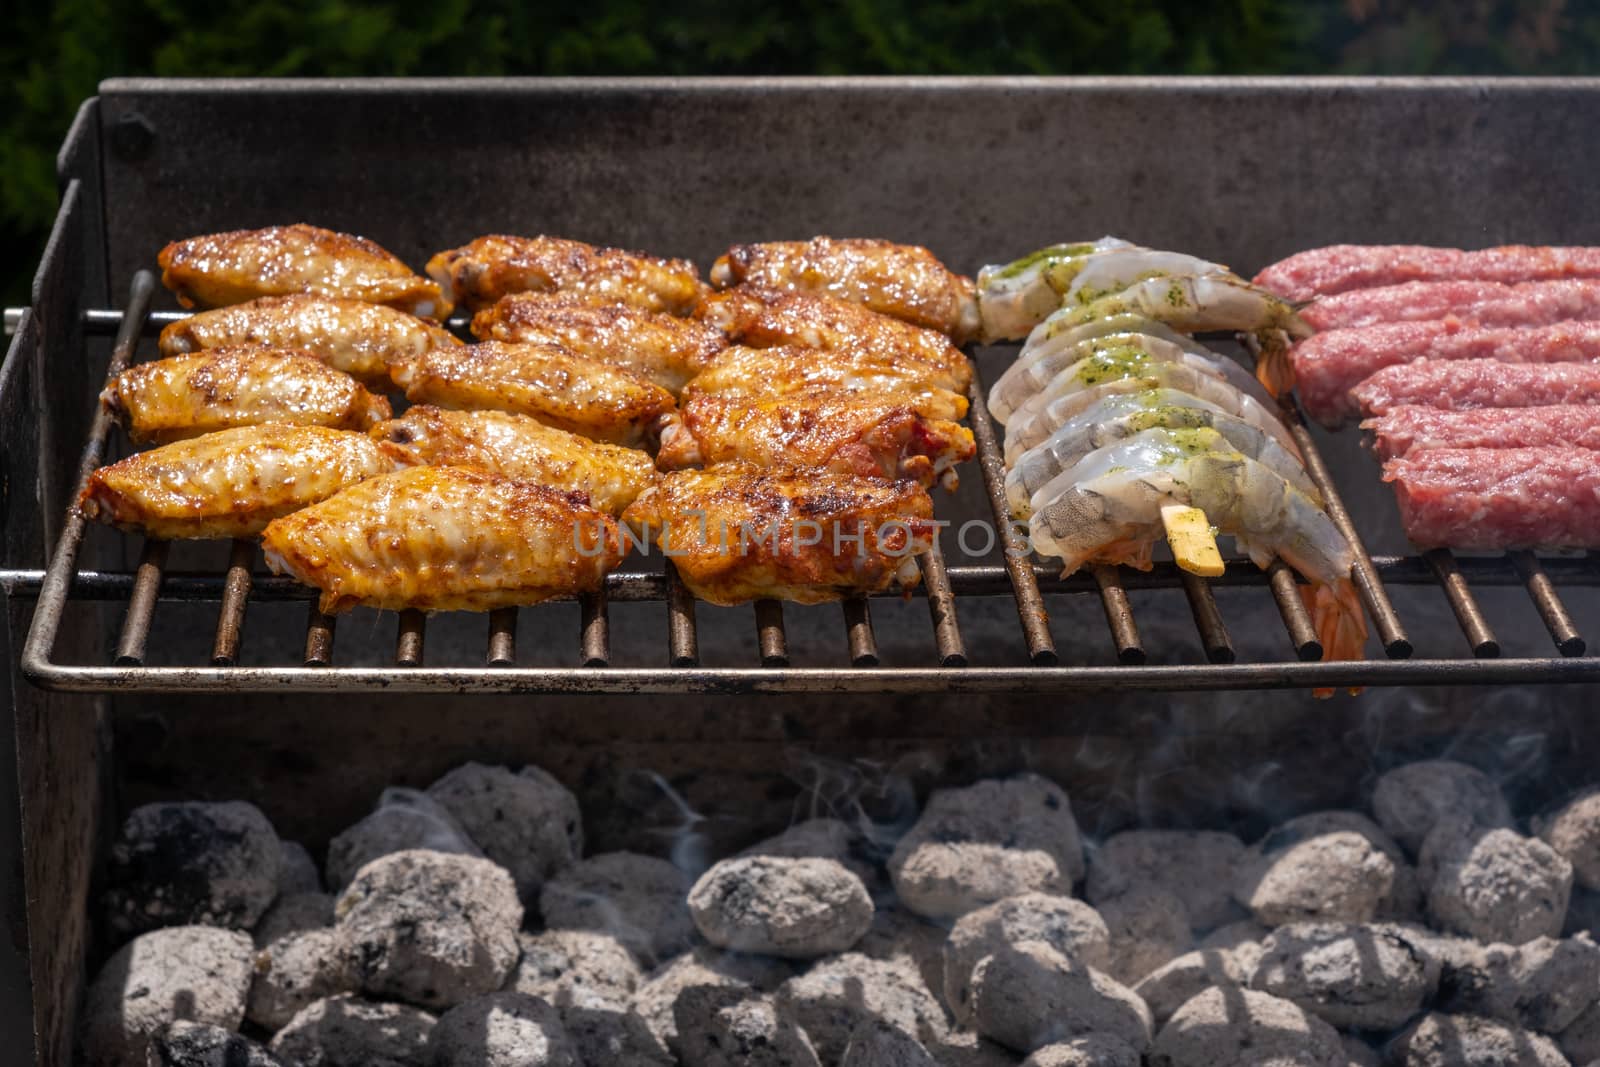 Mixed assortment of marinated meat, chicken, and prawns grilling on hot coals on a BBQ by asafaric